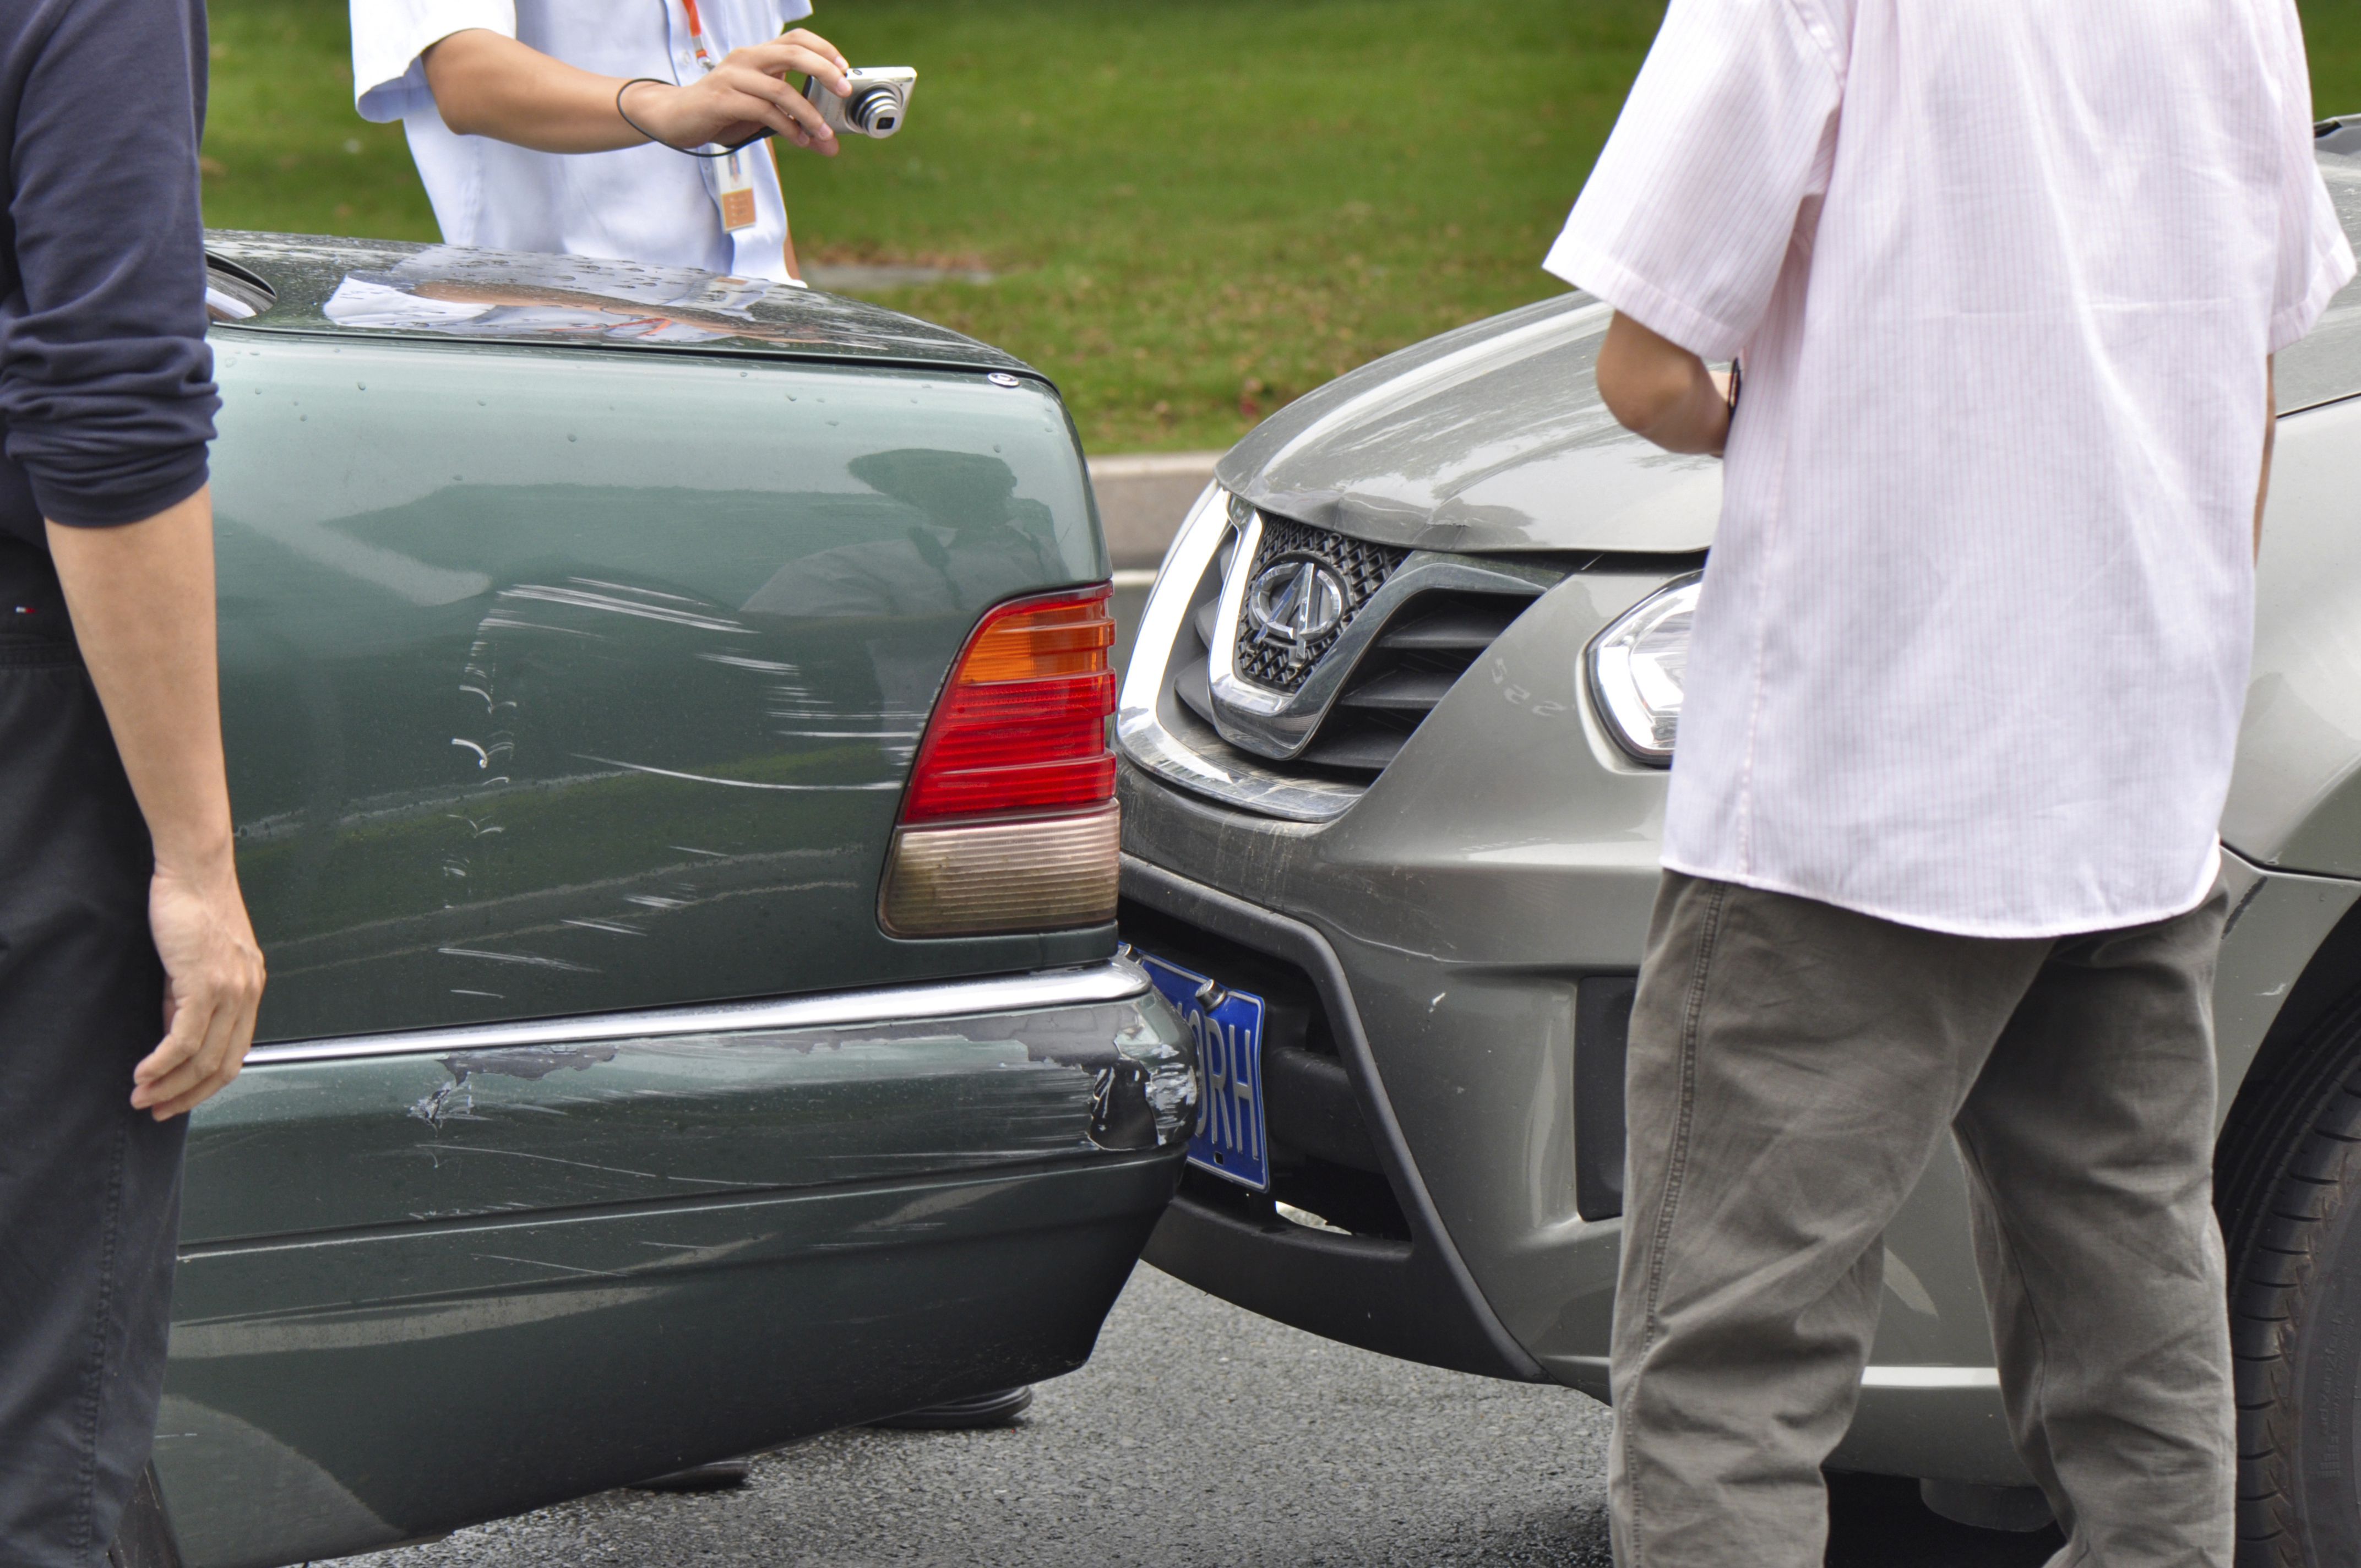 3 Essential DOS and DON’TS while raising a car insurance